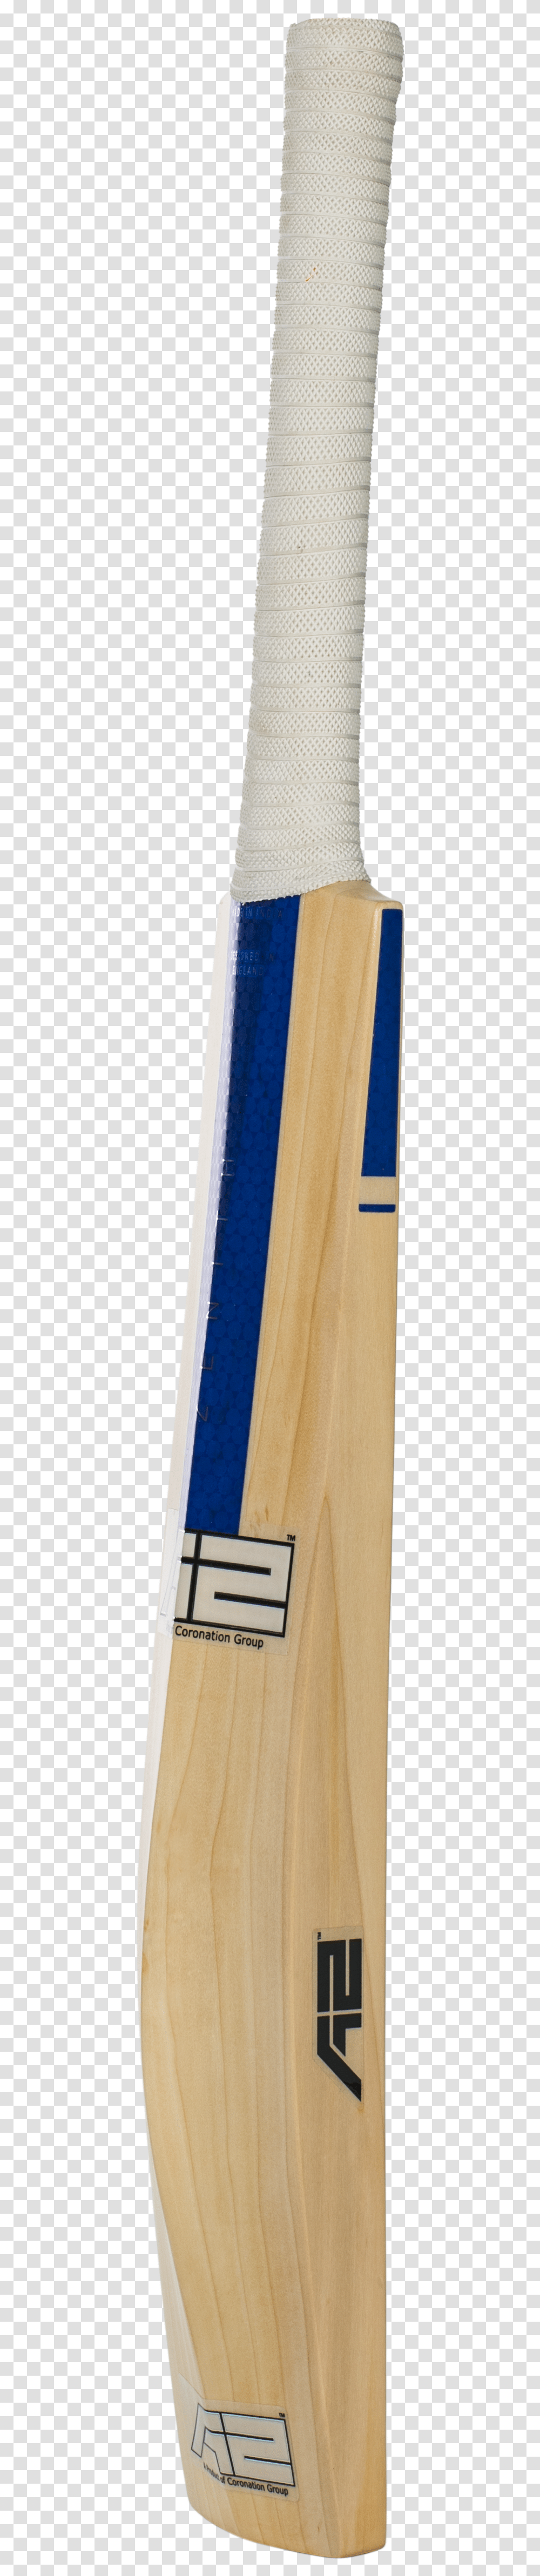 English Willow Cricket Bat Manufacturers In India, Sea, Outdoors, Water, Nature Transparent Png